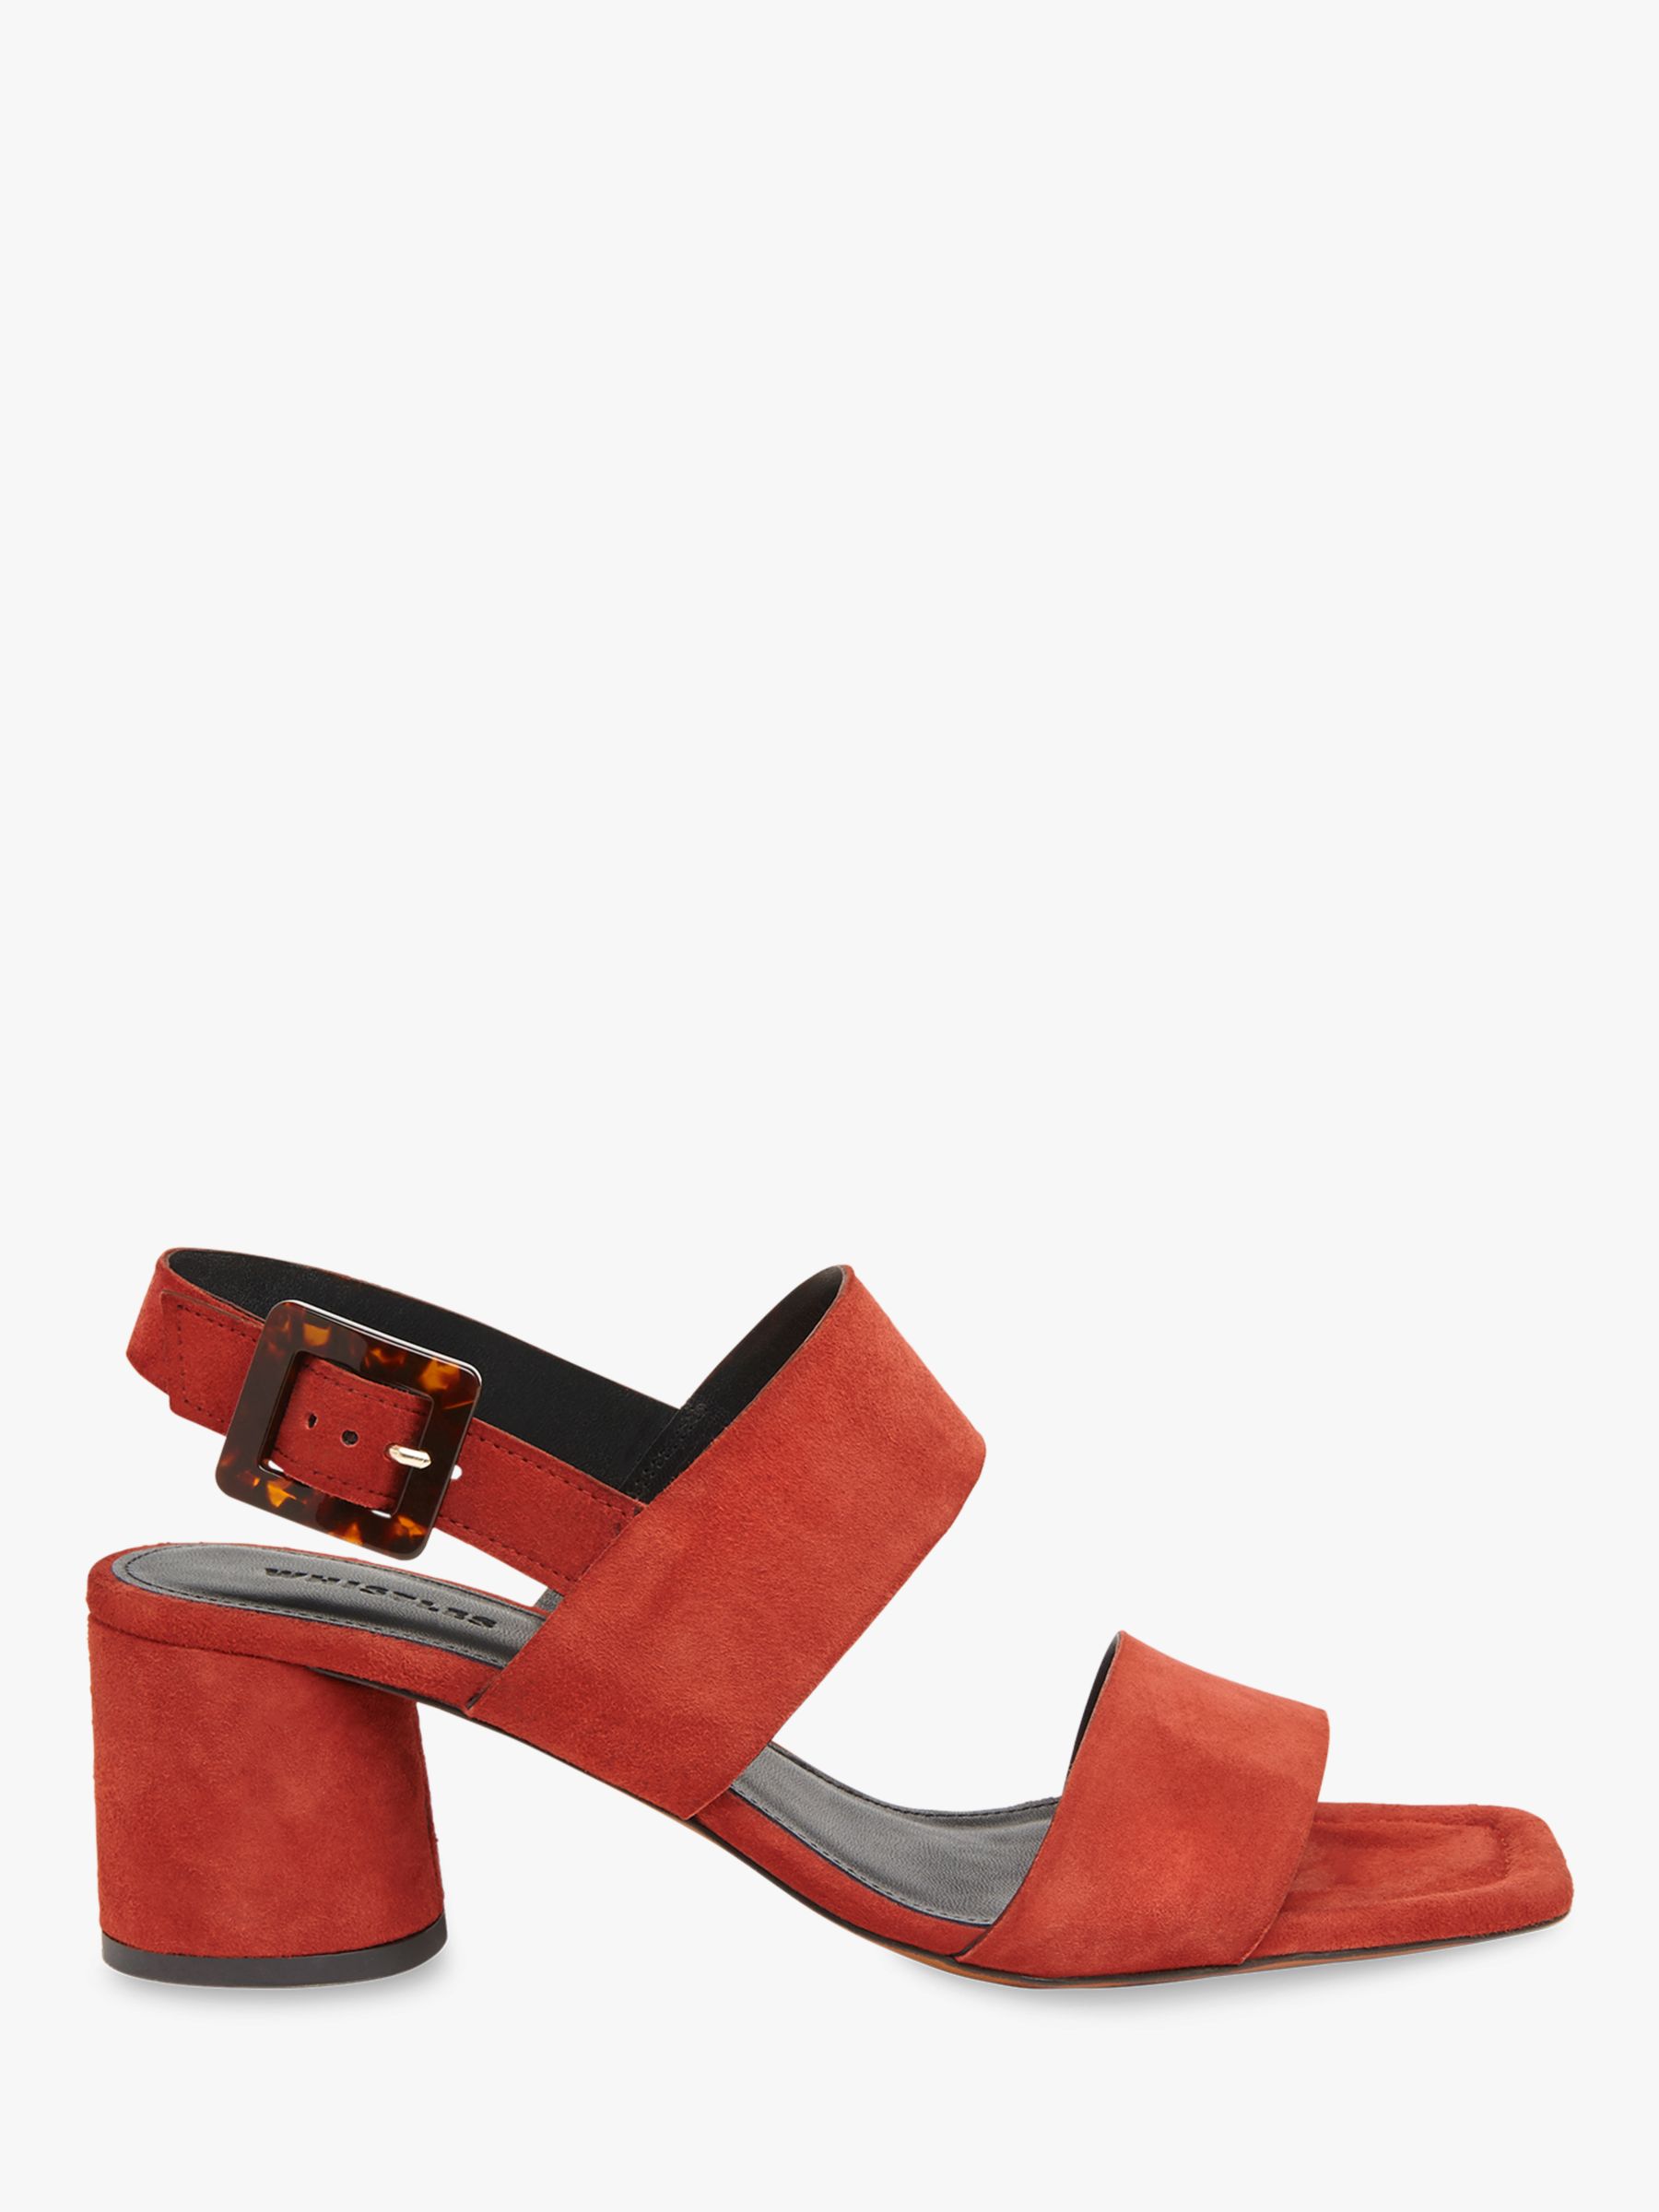 Whistles Avery Buckle Sandals, Rust Suede